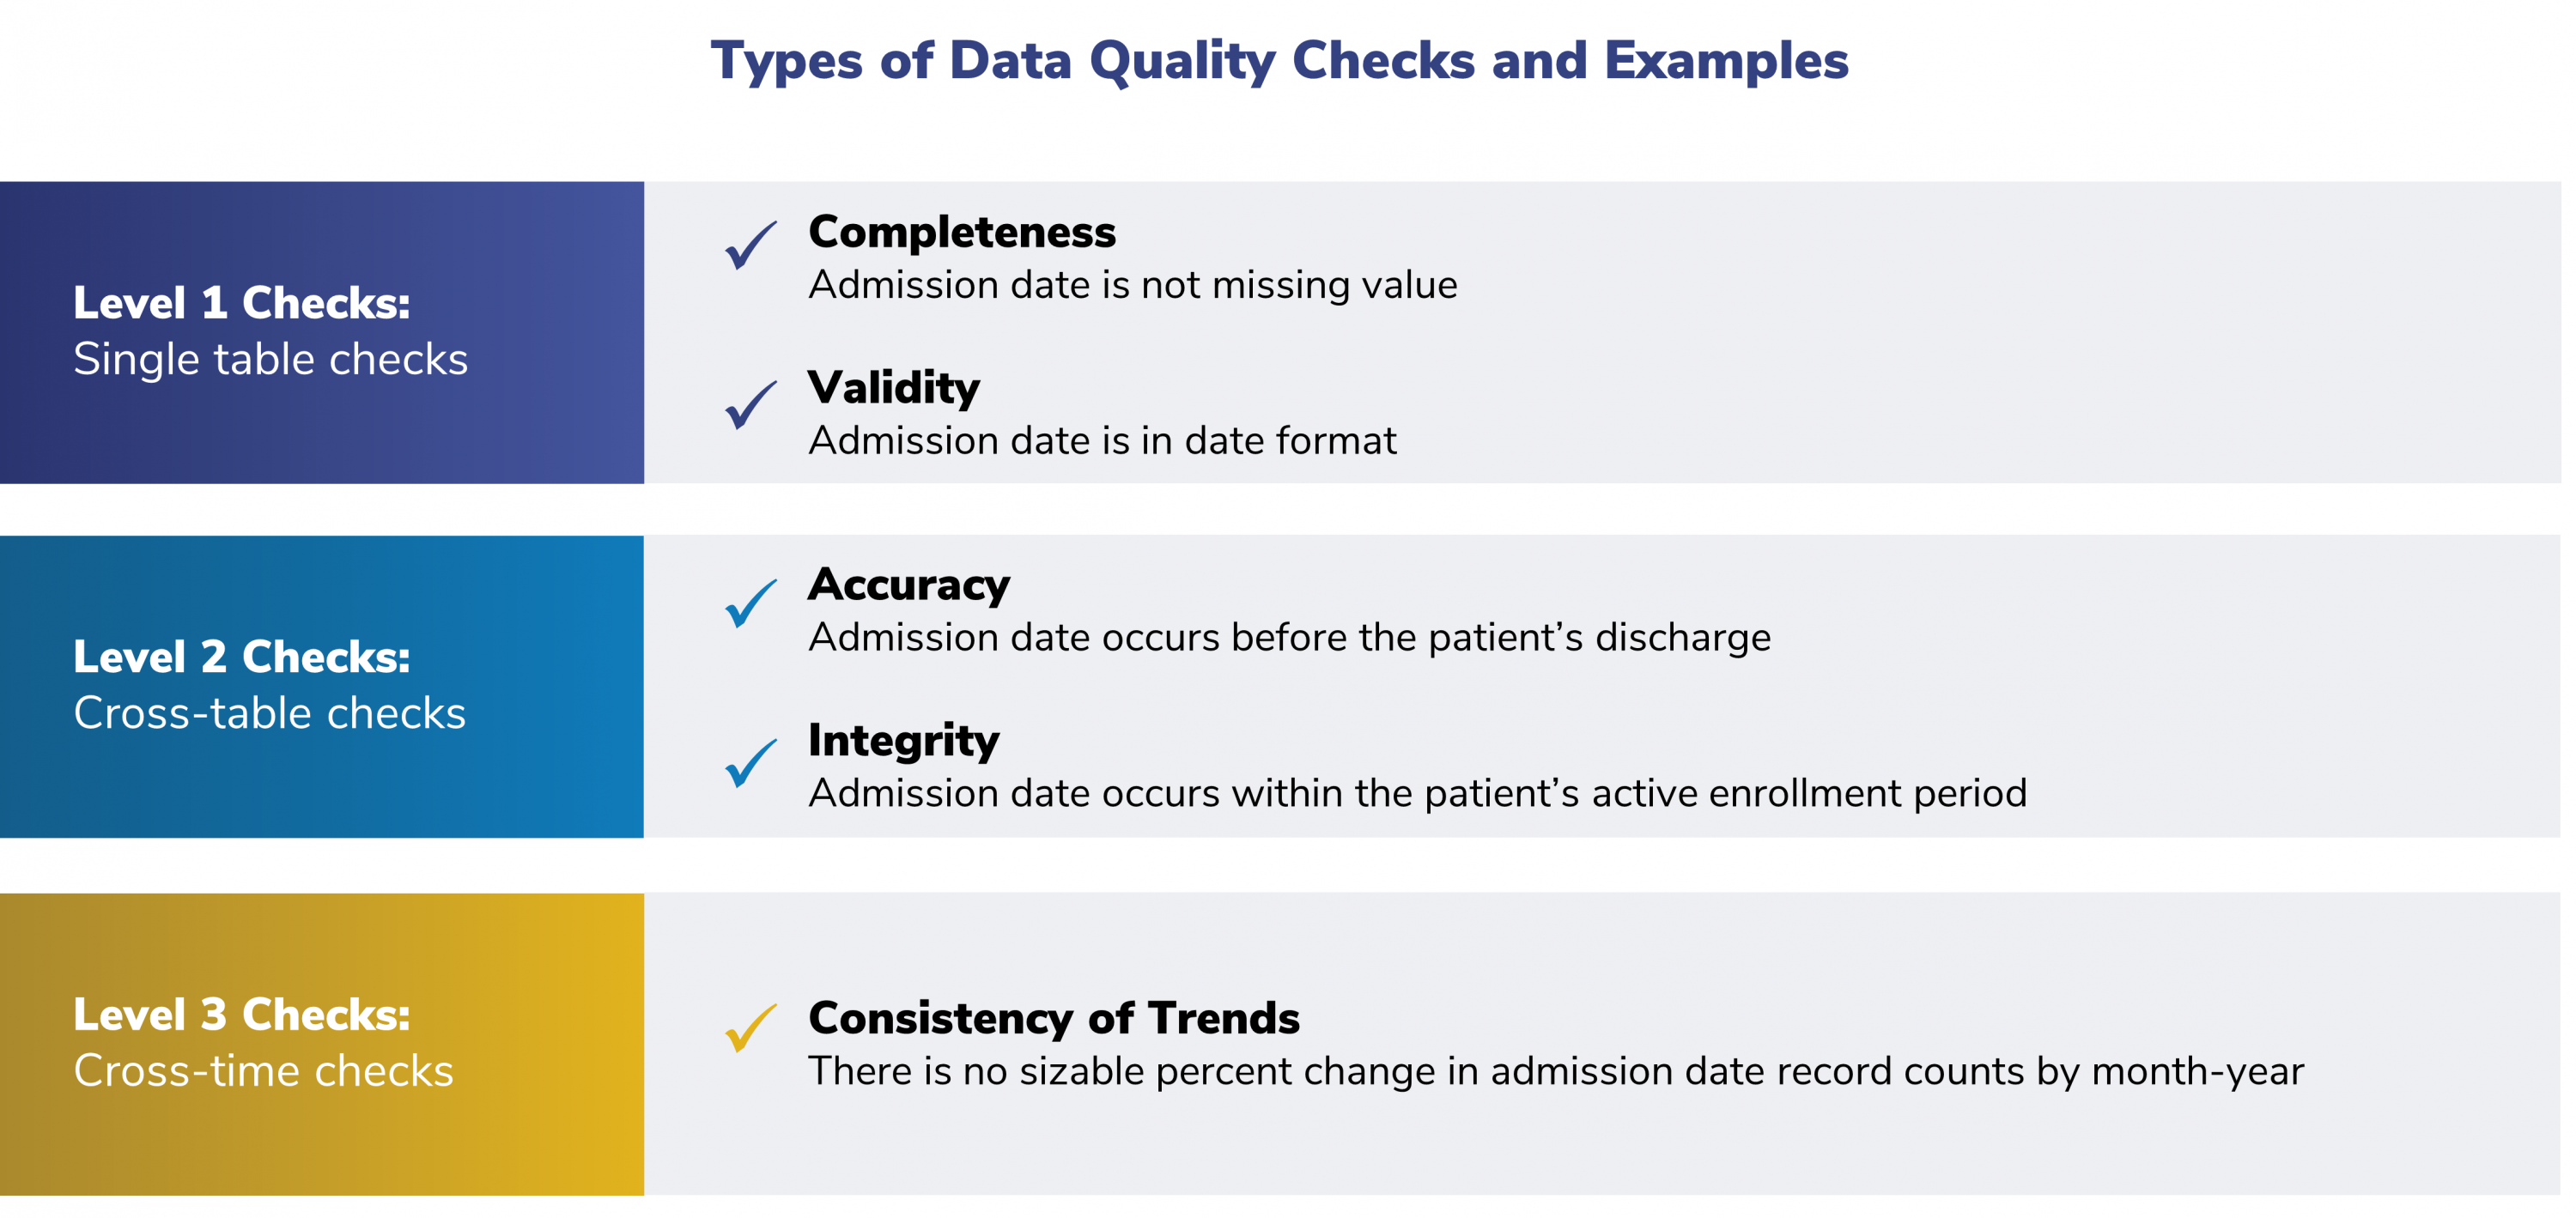 Level 1, 2, and 3 data quality checks, described below